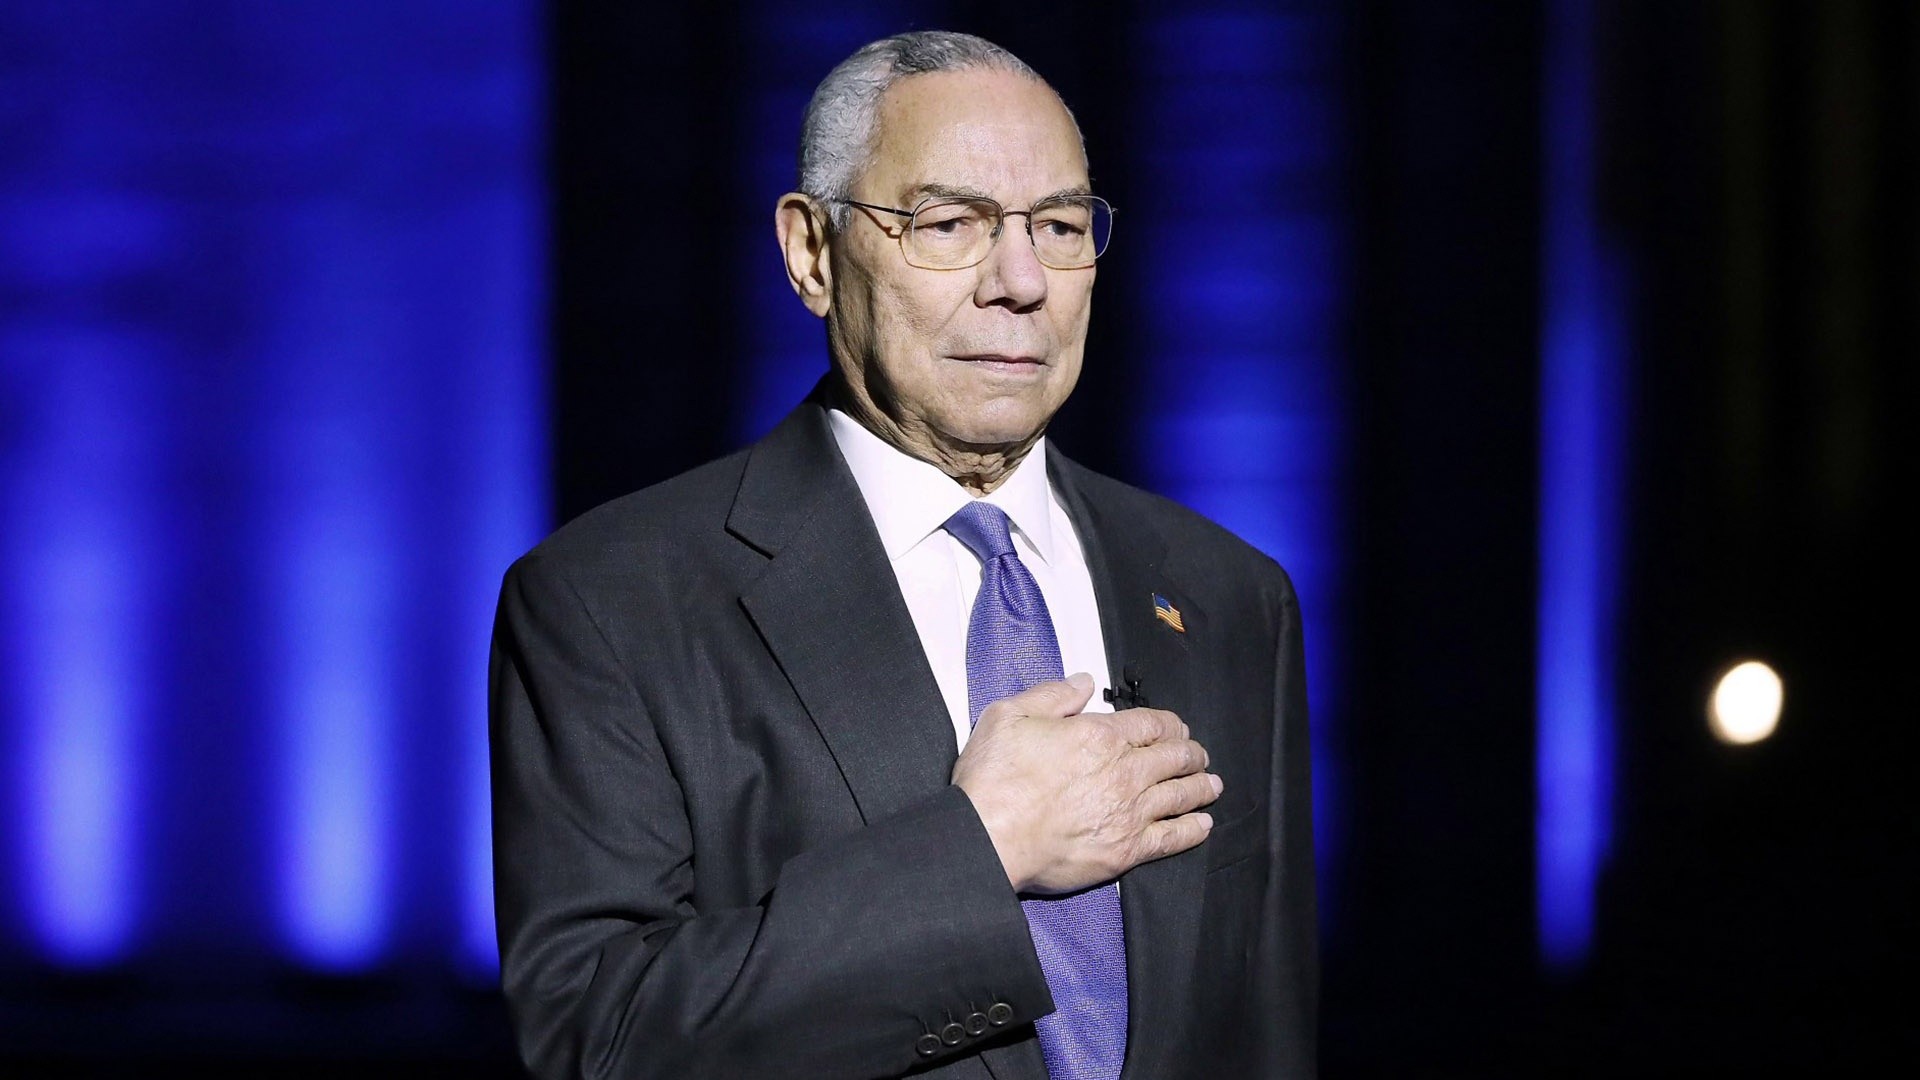 Former Secretary of State Colin Powell dies from Covid complications